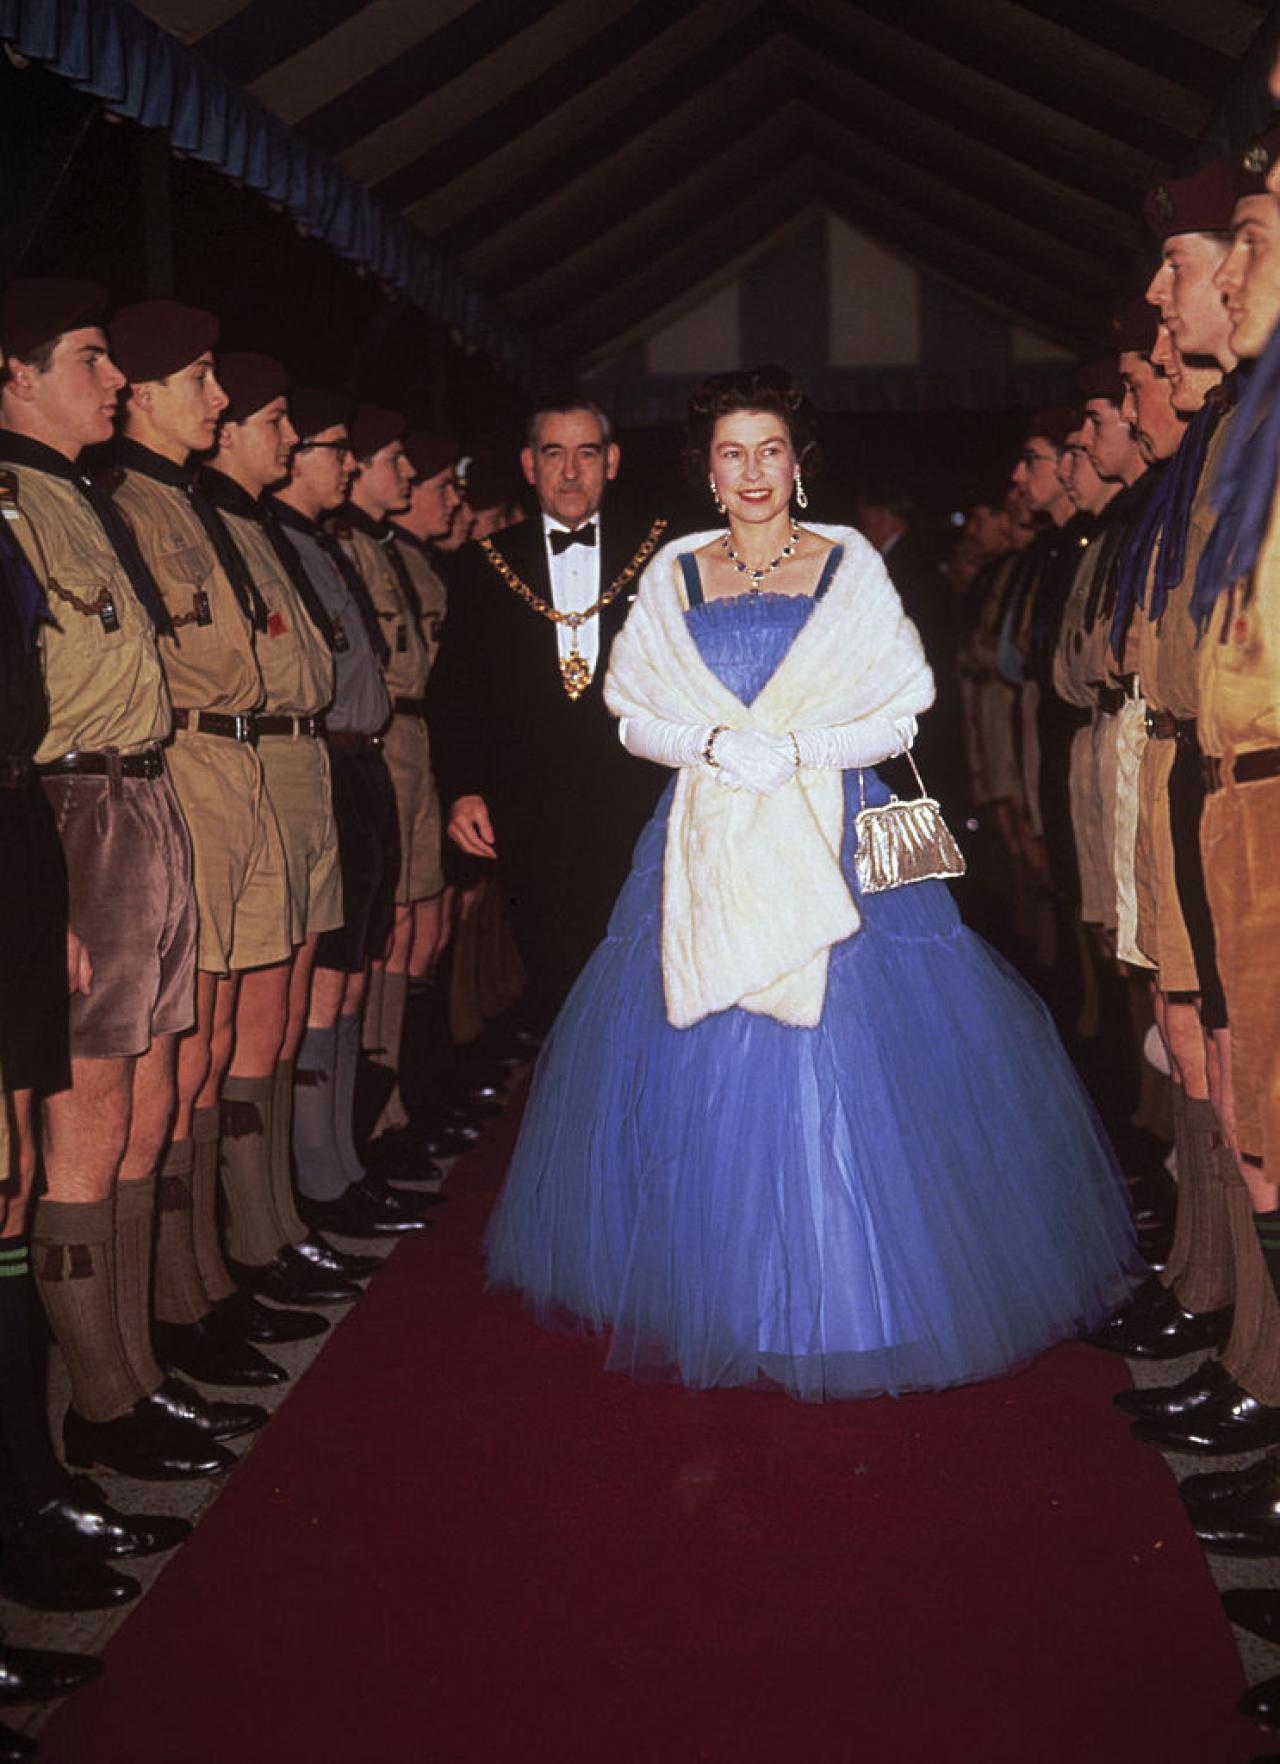 Queen Elizabeth II inspects boy scouts at a performance of the scouting revue, 'The Gang Show', 1967. (Photo by Hulton Archive/Getty Images)